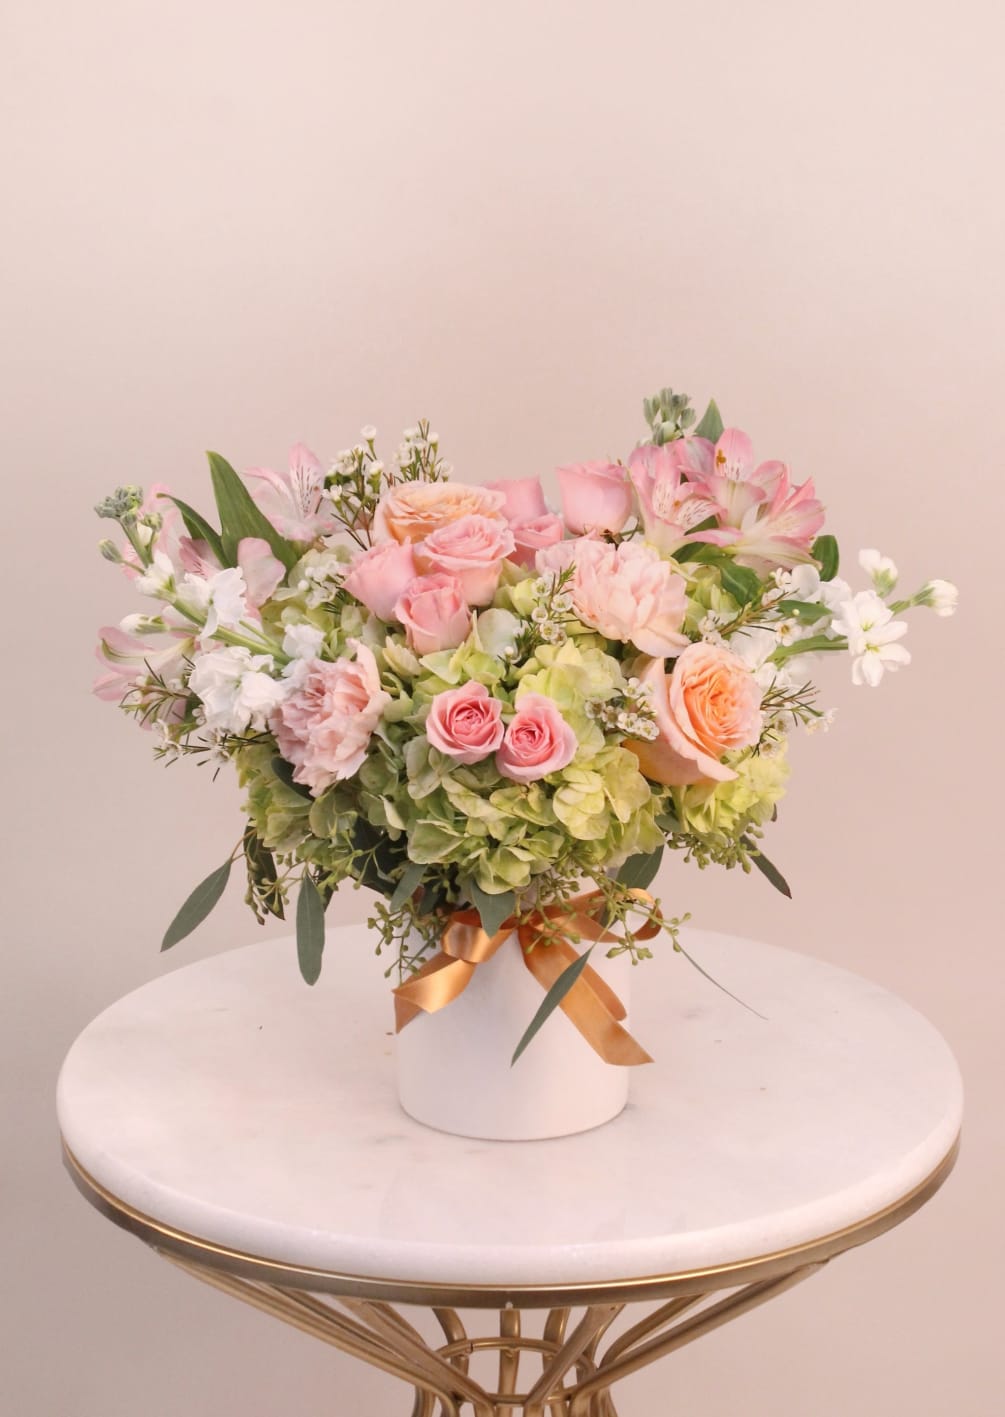 A romantic arrangement of peach, pink and  green flowers in a